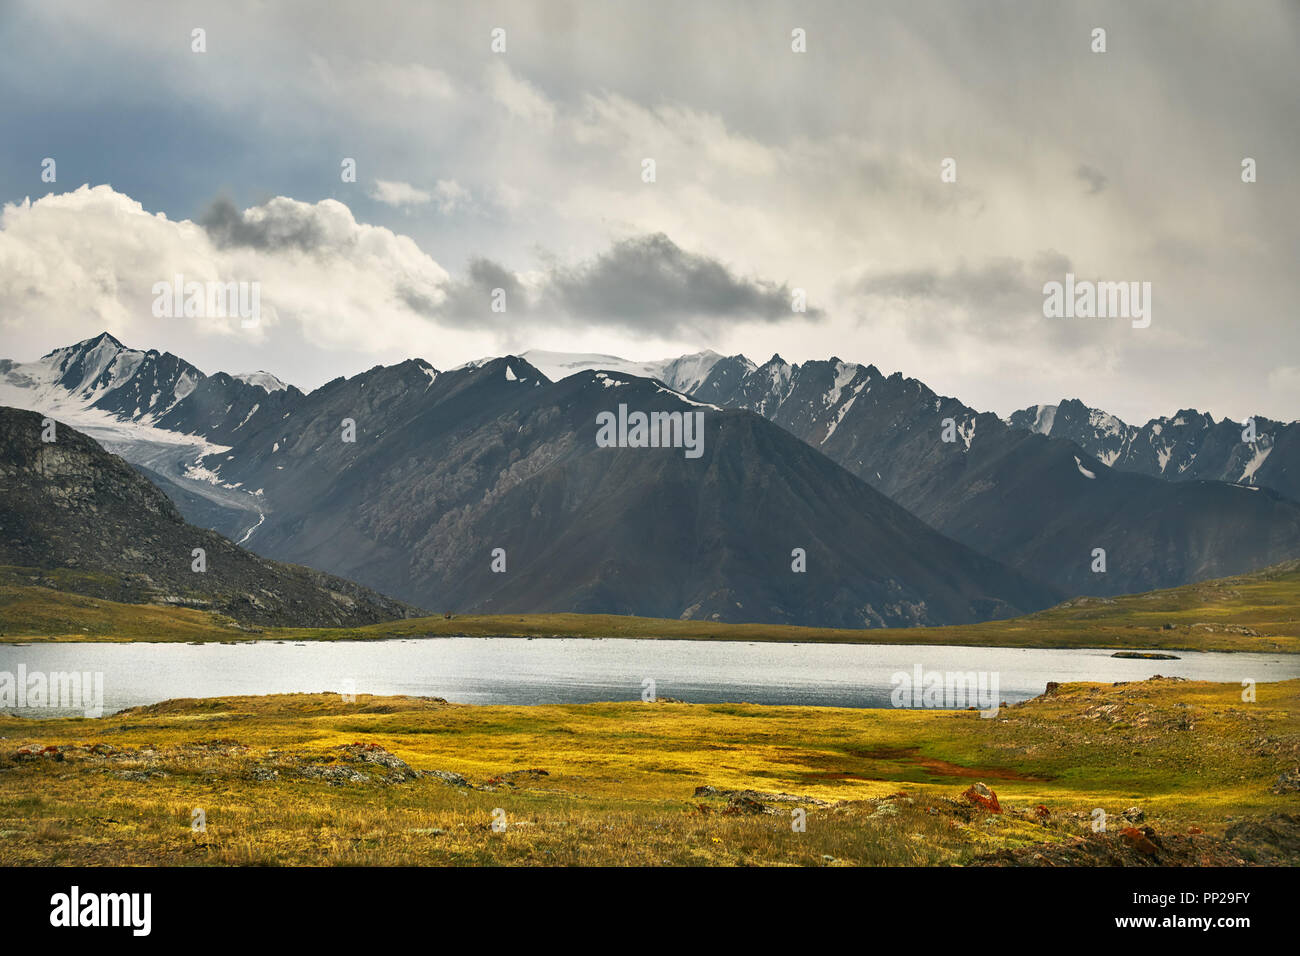 Beautiful Lake and Mountain Range in the valley against cloudy sky in Kyrgyzstan Stock Photo